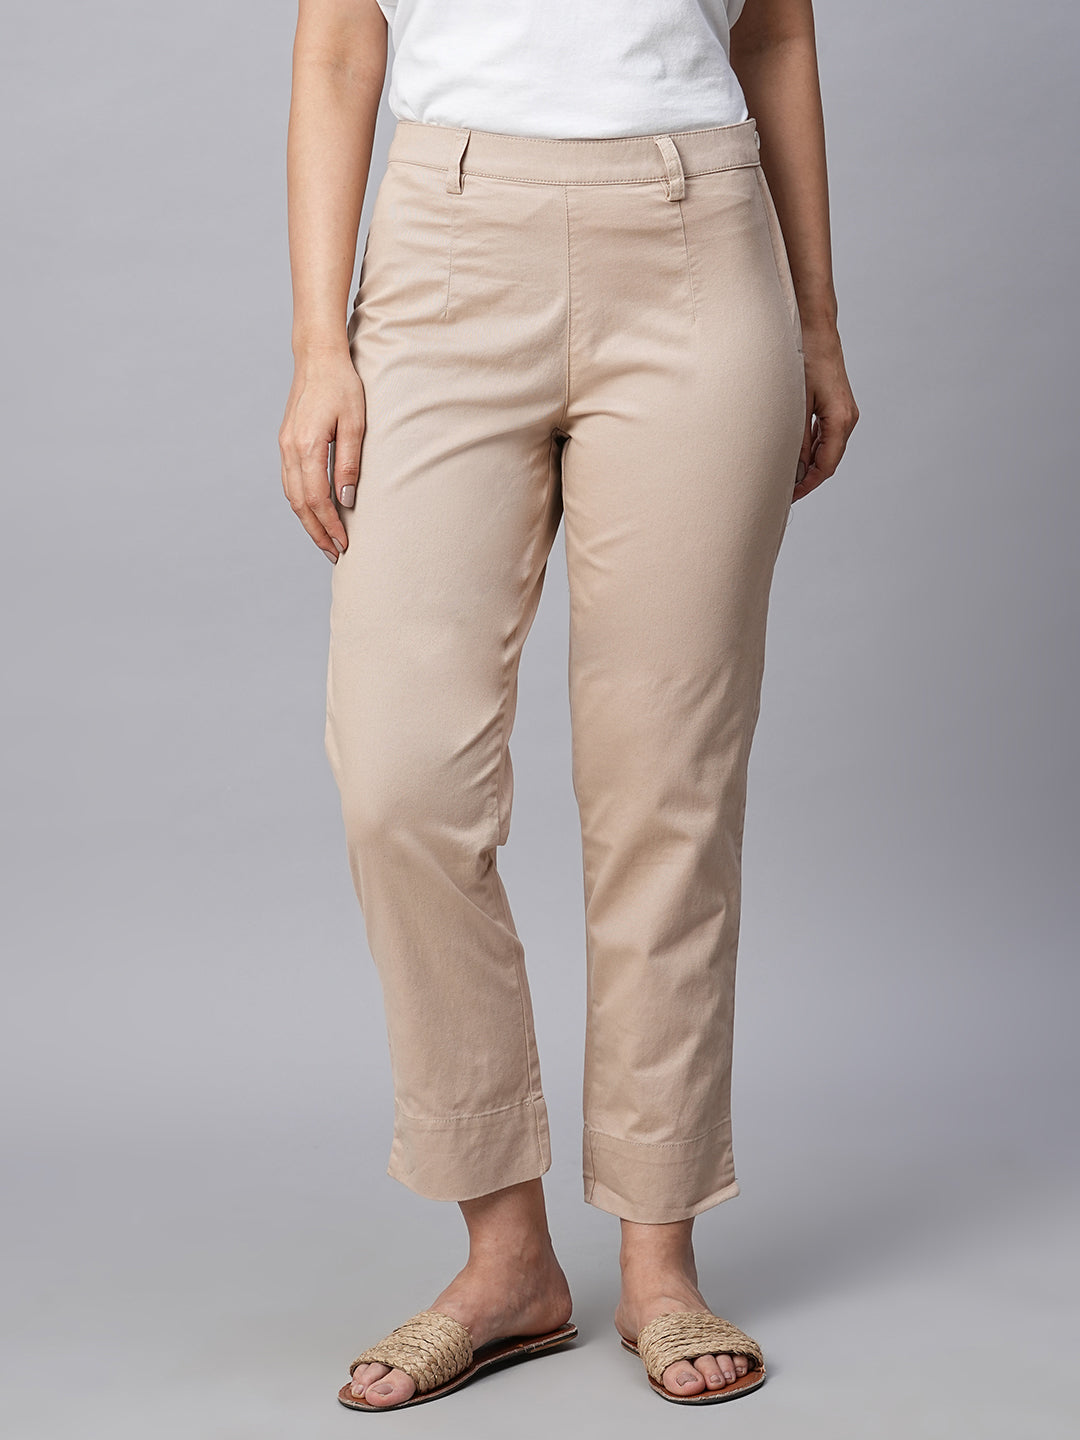 Buy Beige Trousers & Pants for Women by UNITED COLORS OF BENETTON Online |  Ajio.com